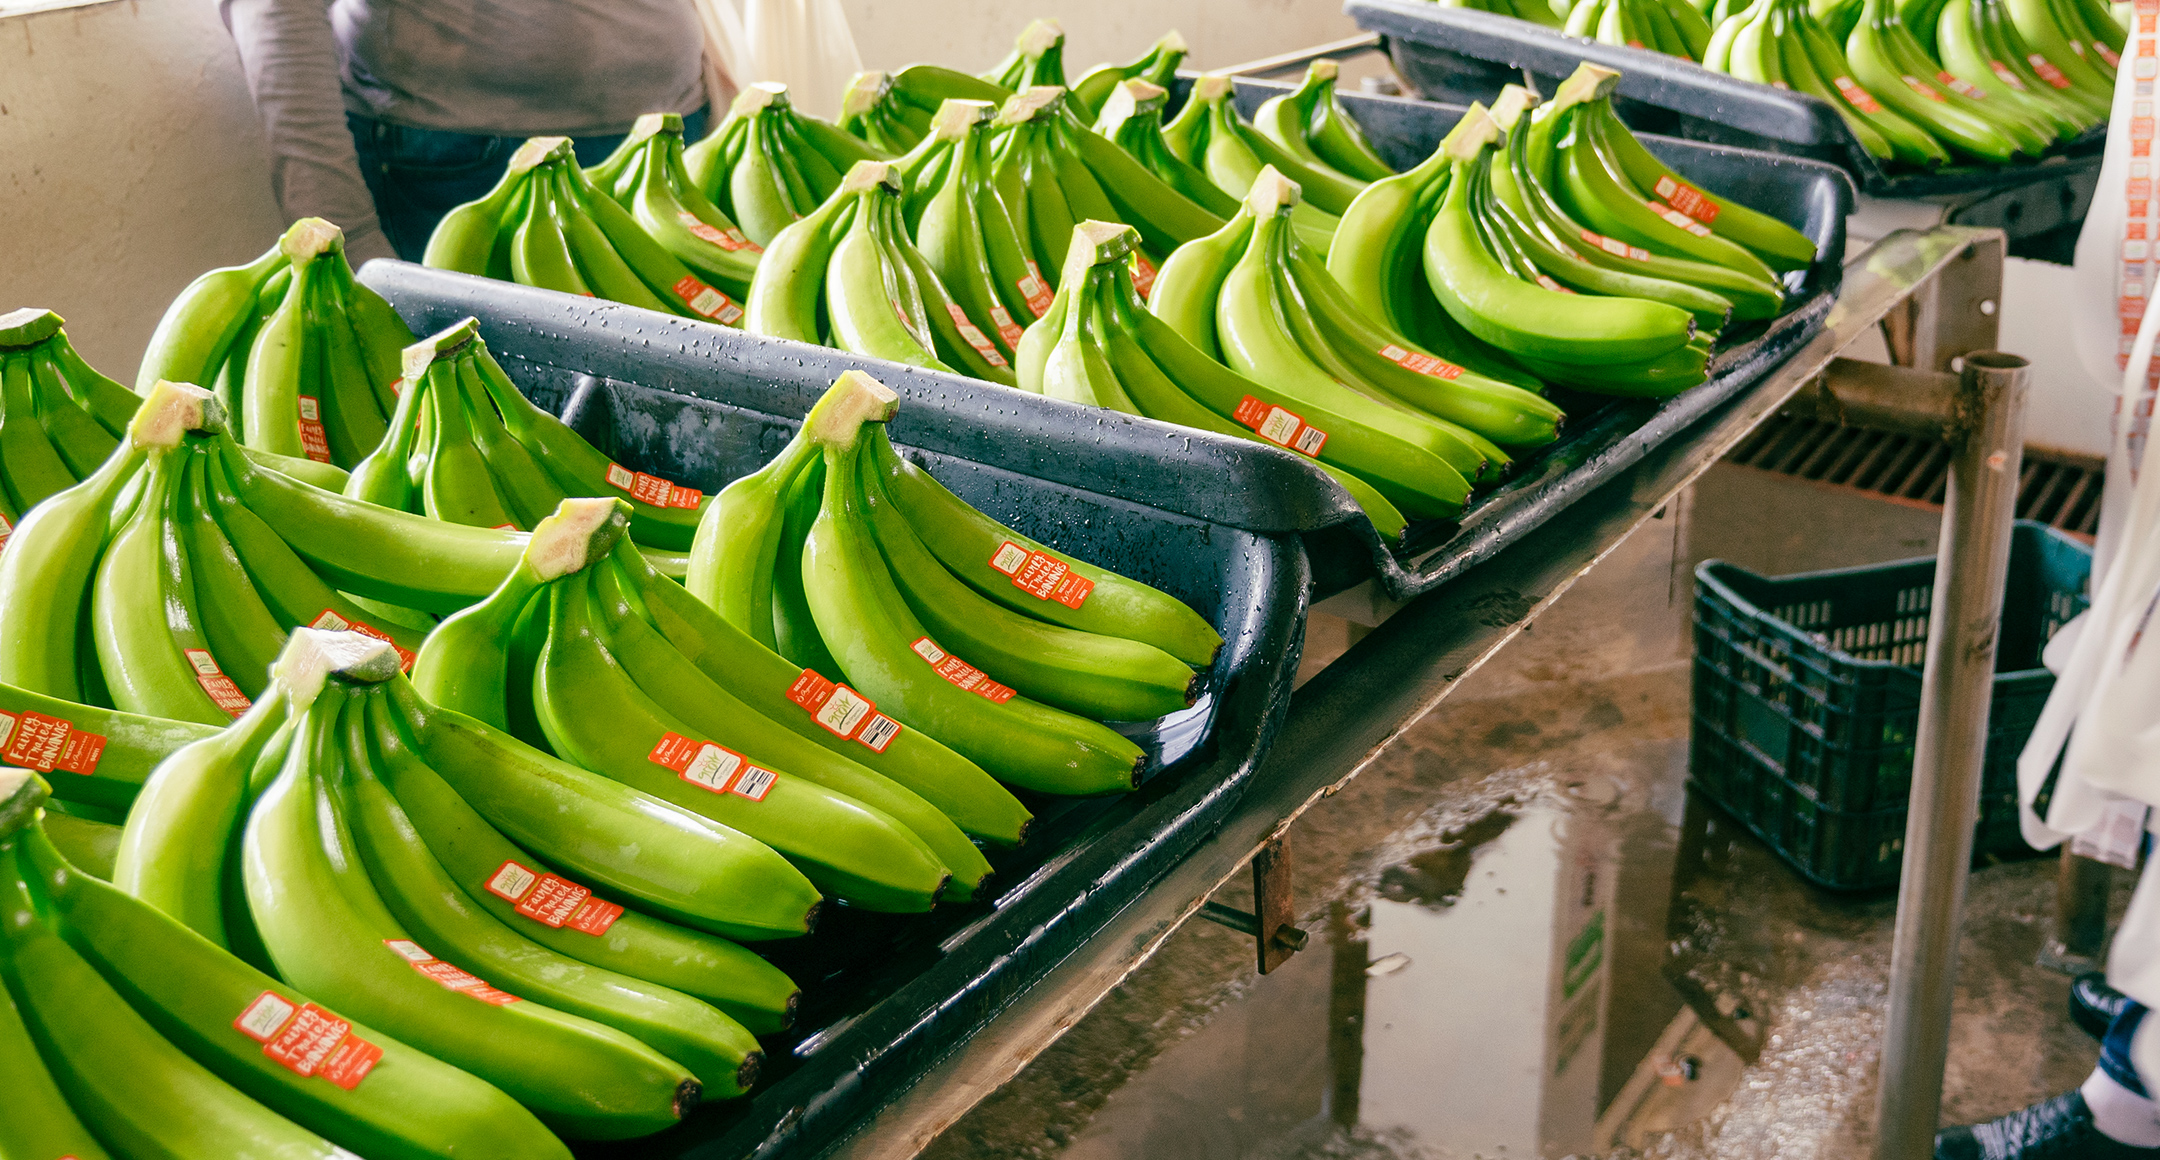 Several bunches of vibrant GROW green bananas lined up on a table.